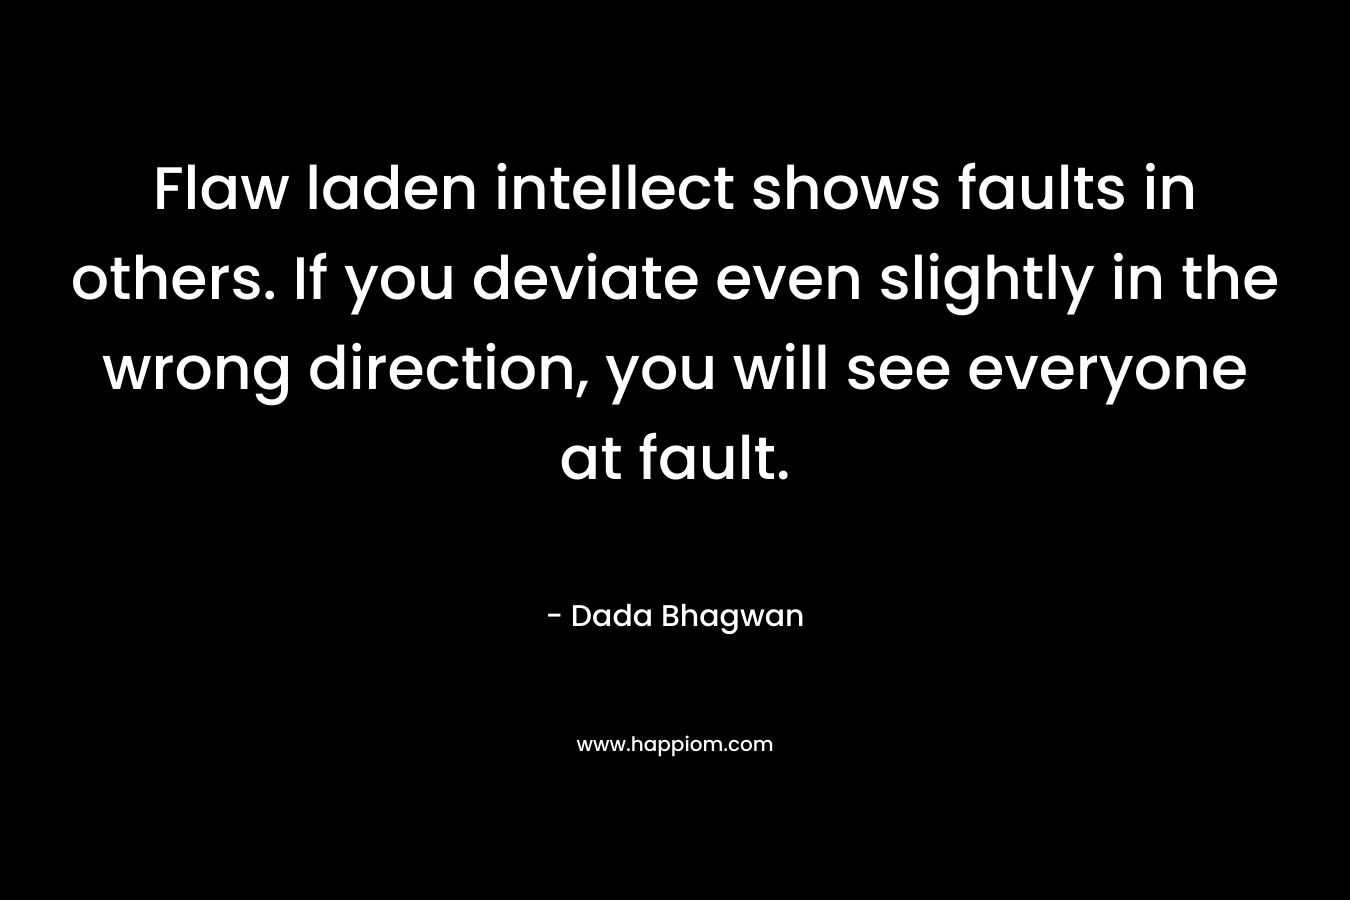 Flaw laden intellect shows faults in others. If you deviate even slightly in the wrong direction, you will see everyone at fault. – Dada Bhagwan